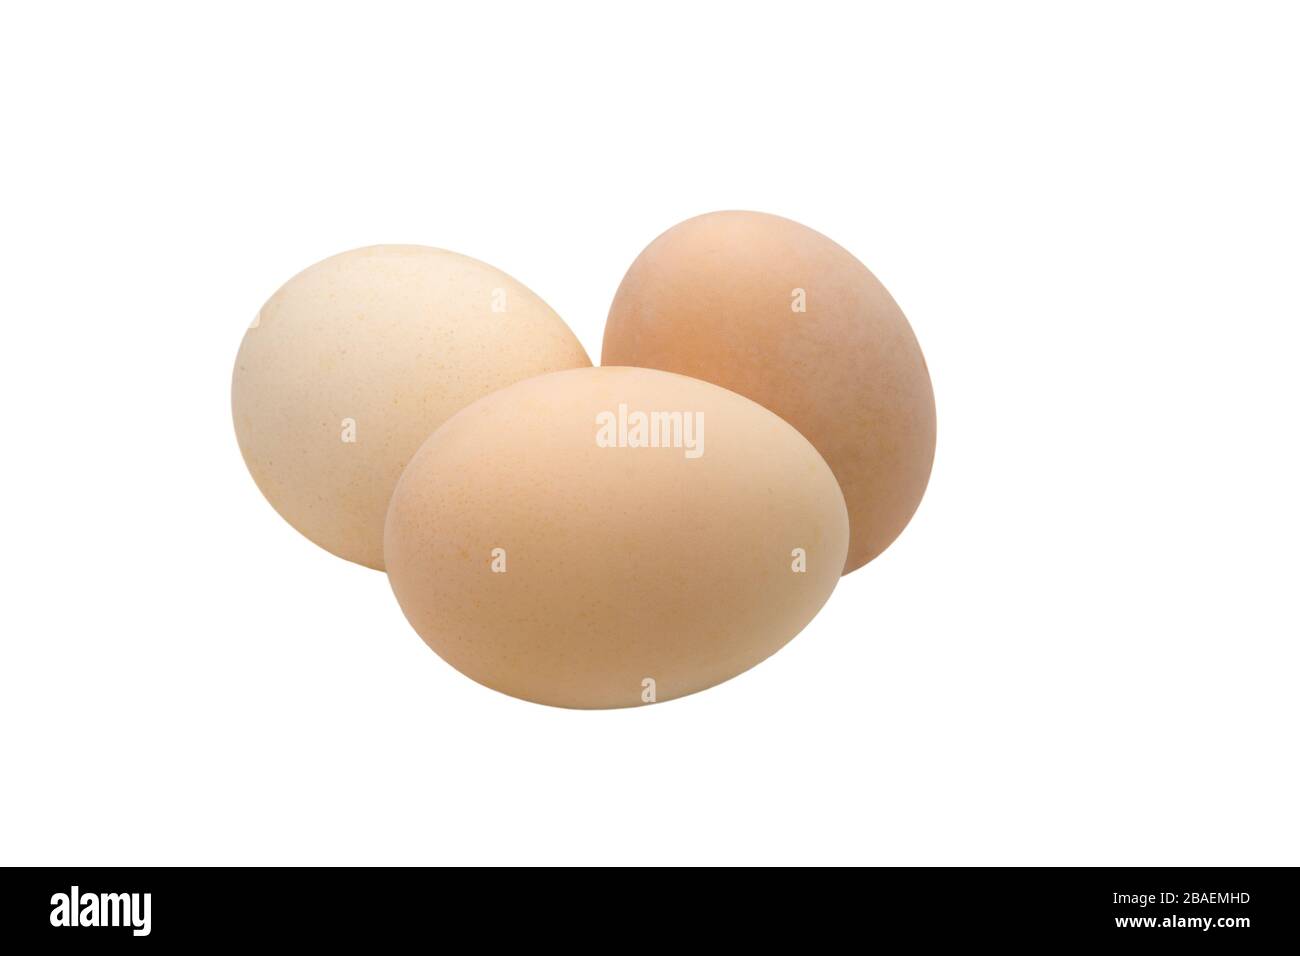 image of three cream-colored chicken eggs on a white background Stock Photo